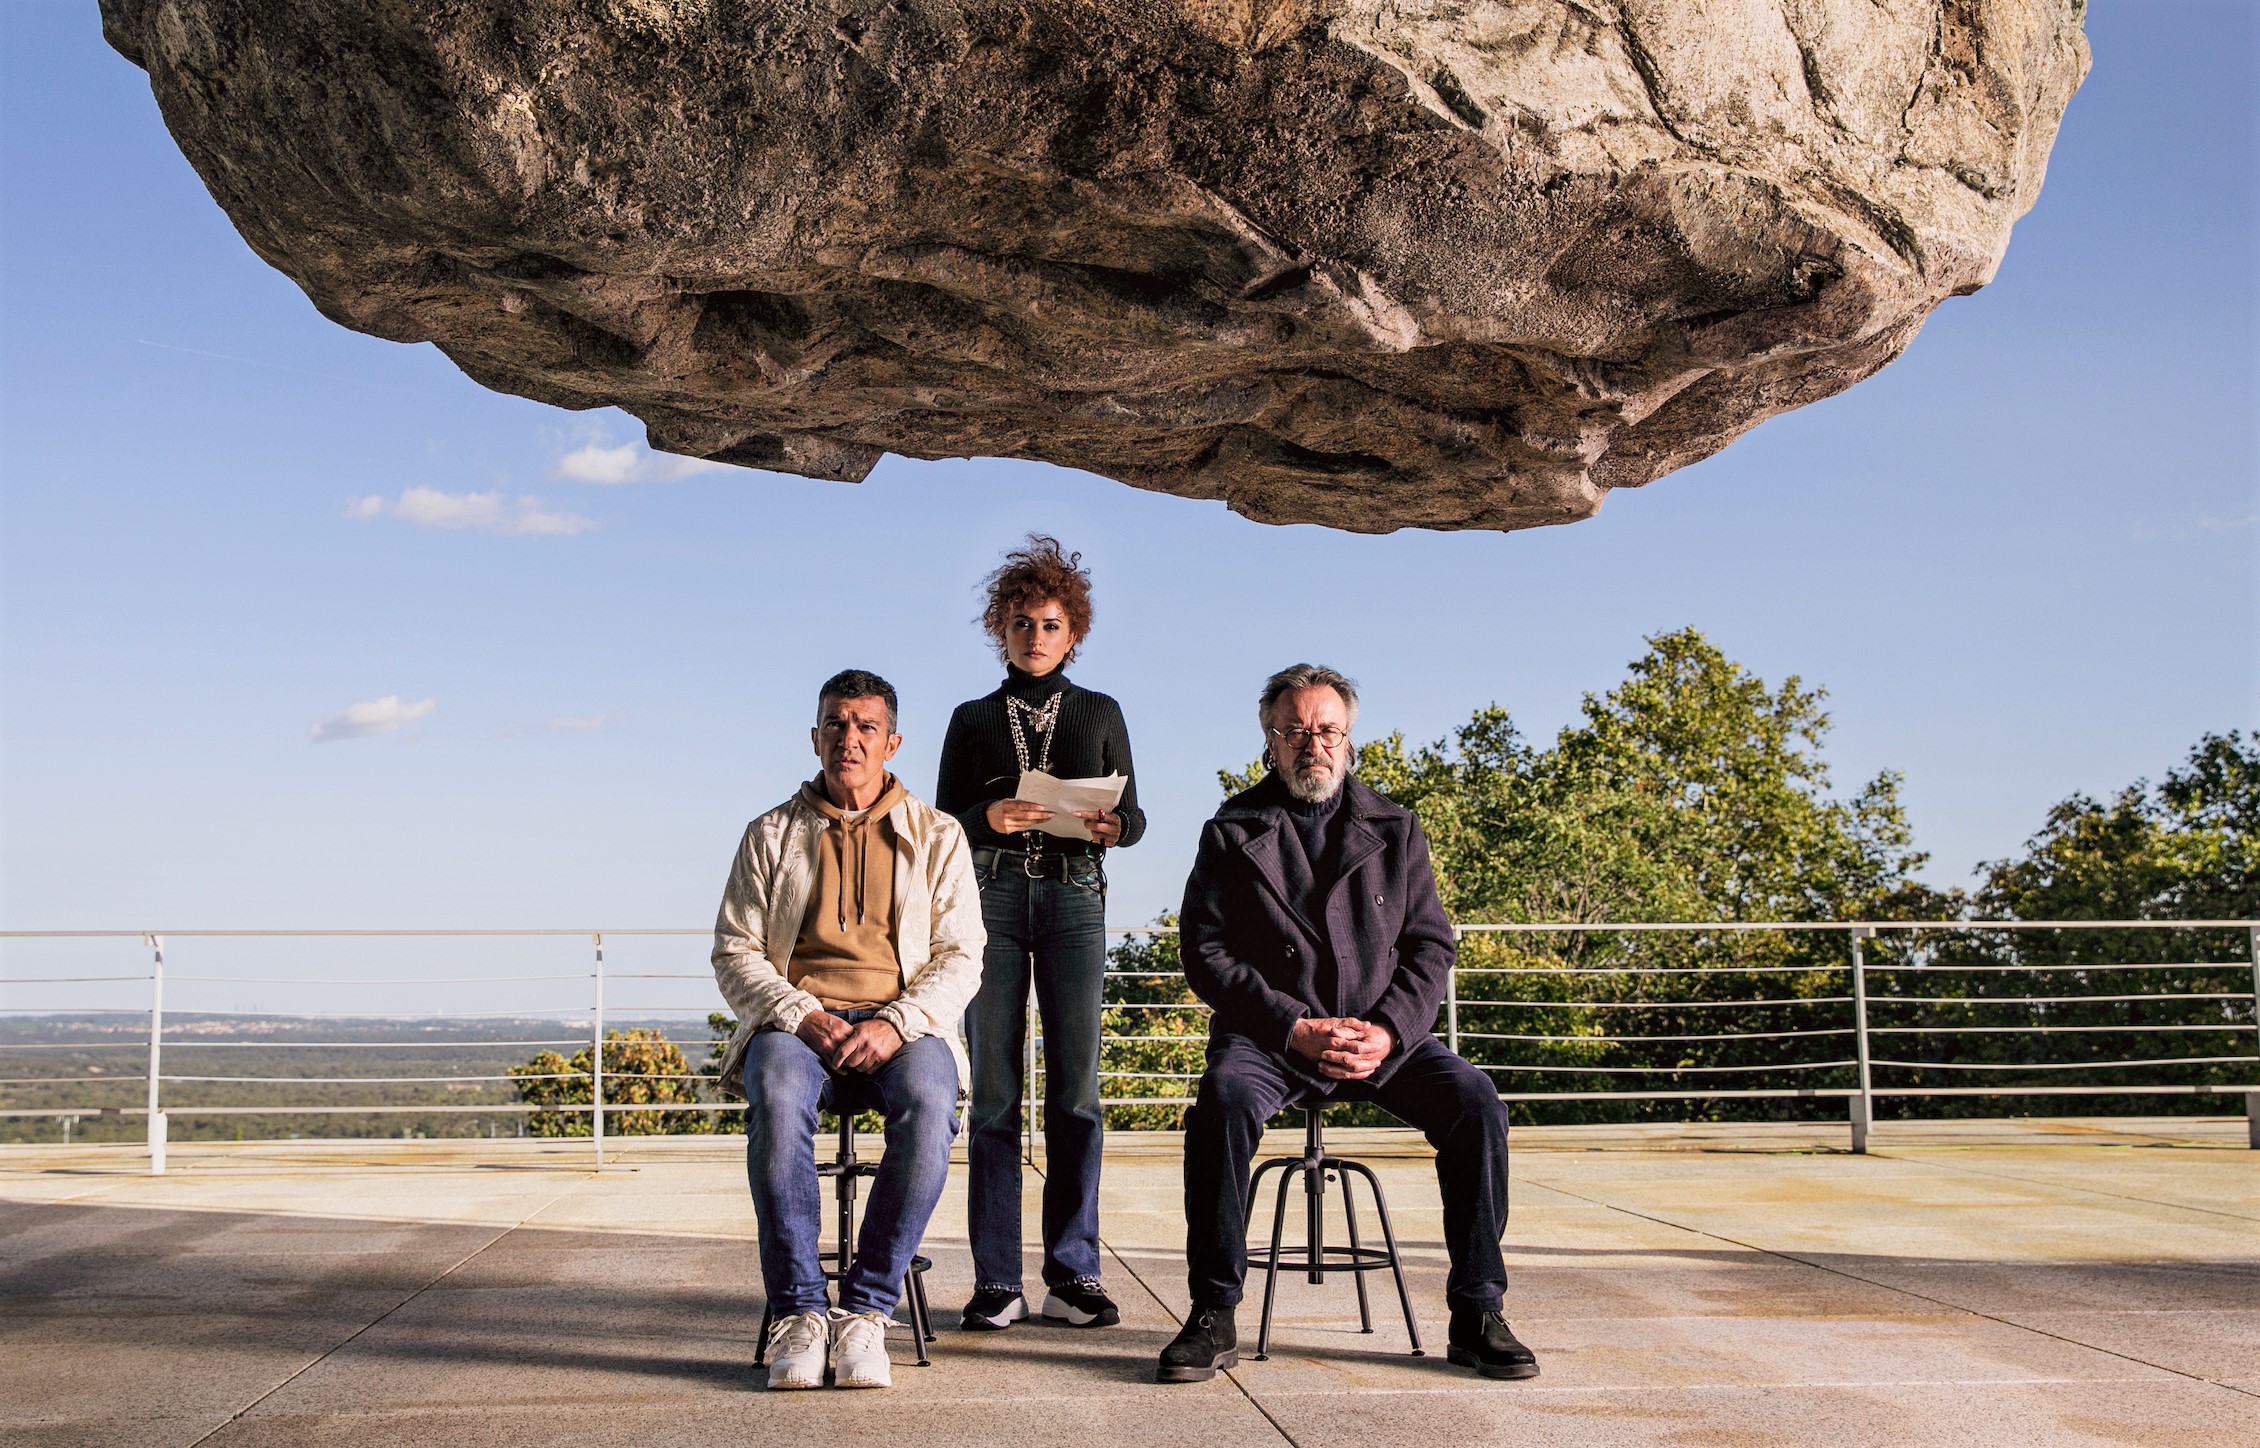 A woman stands and two men sit on chairs underneath a suspended big rock,